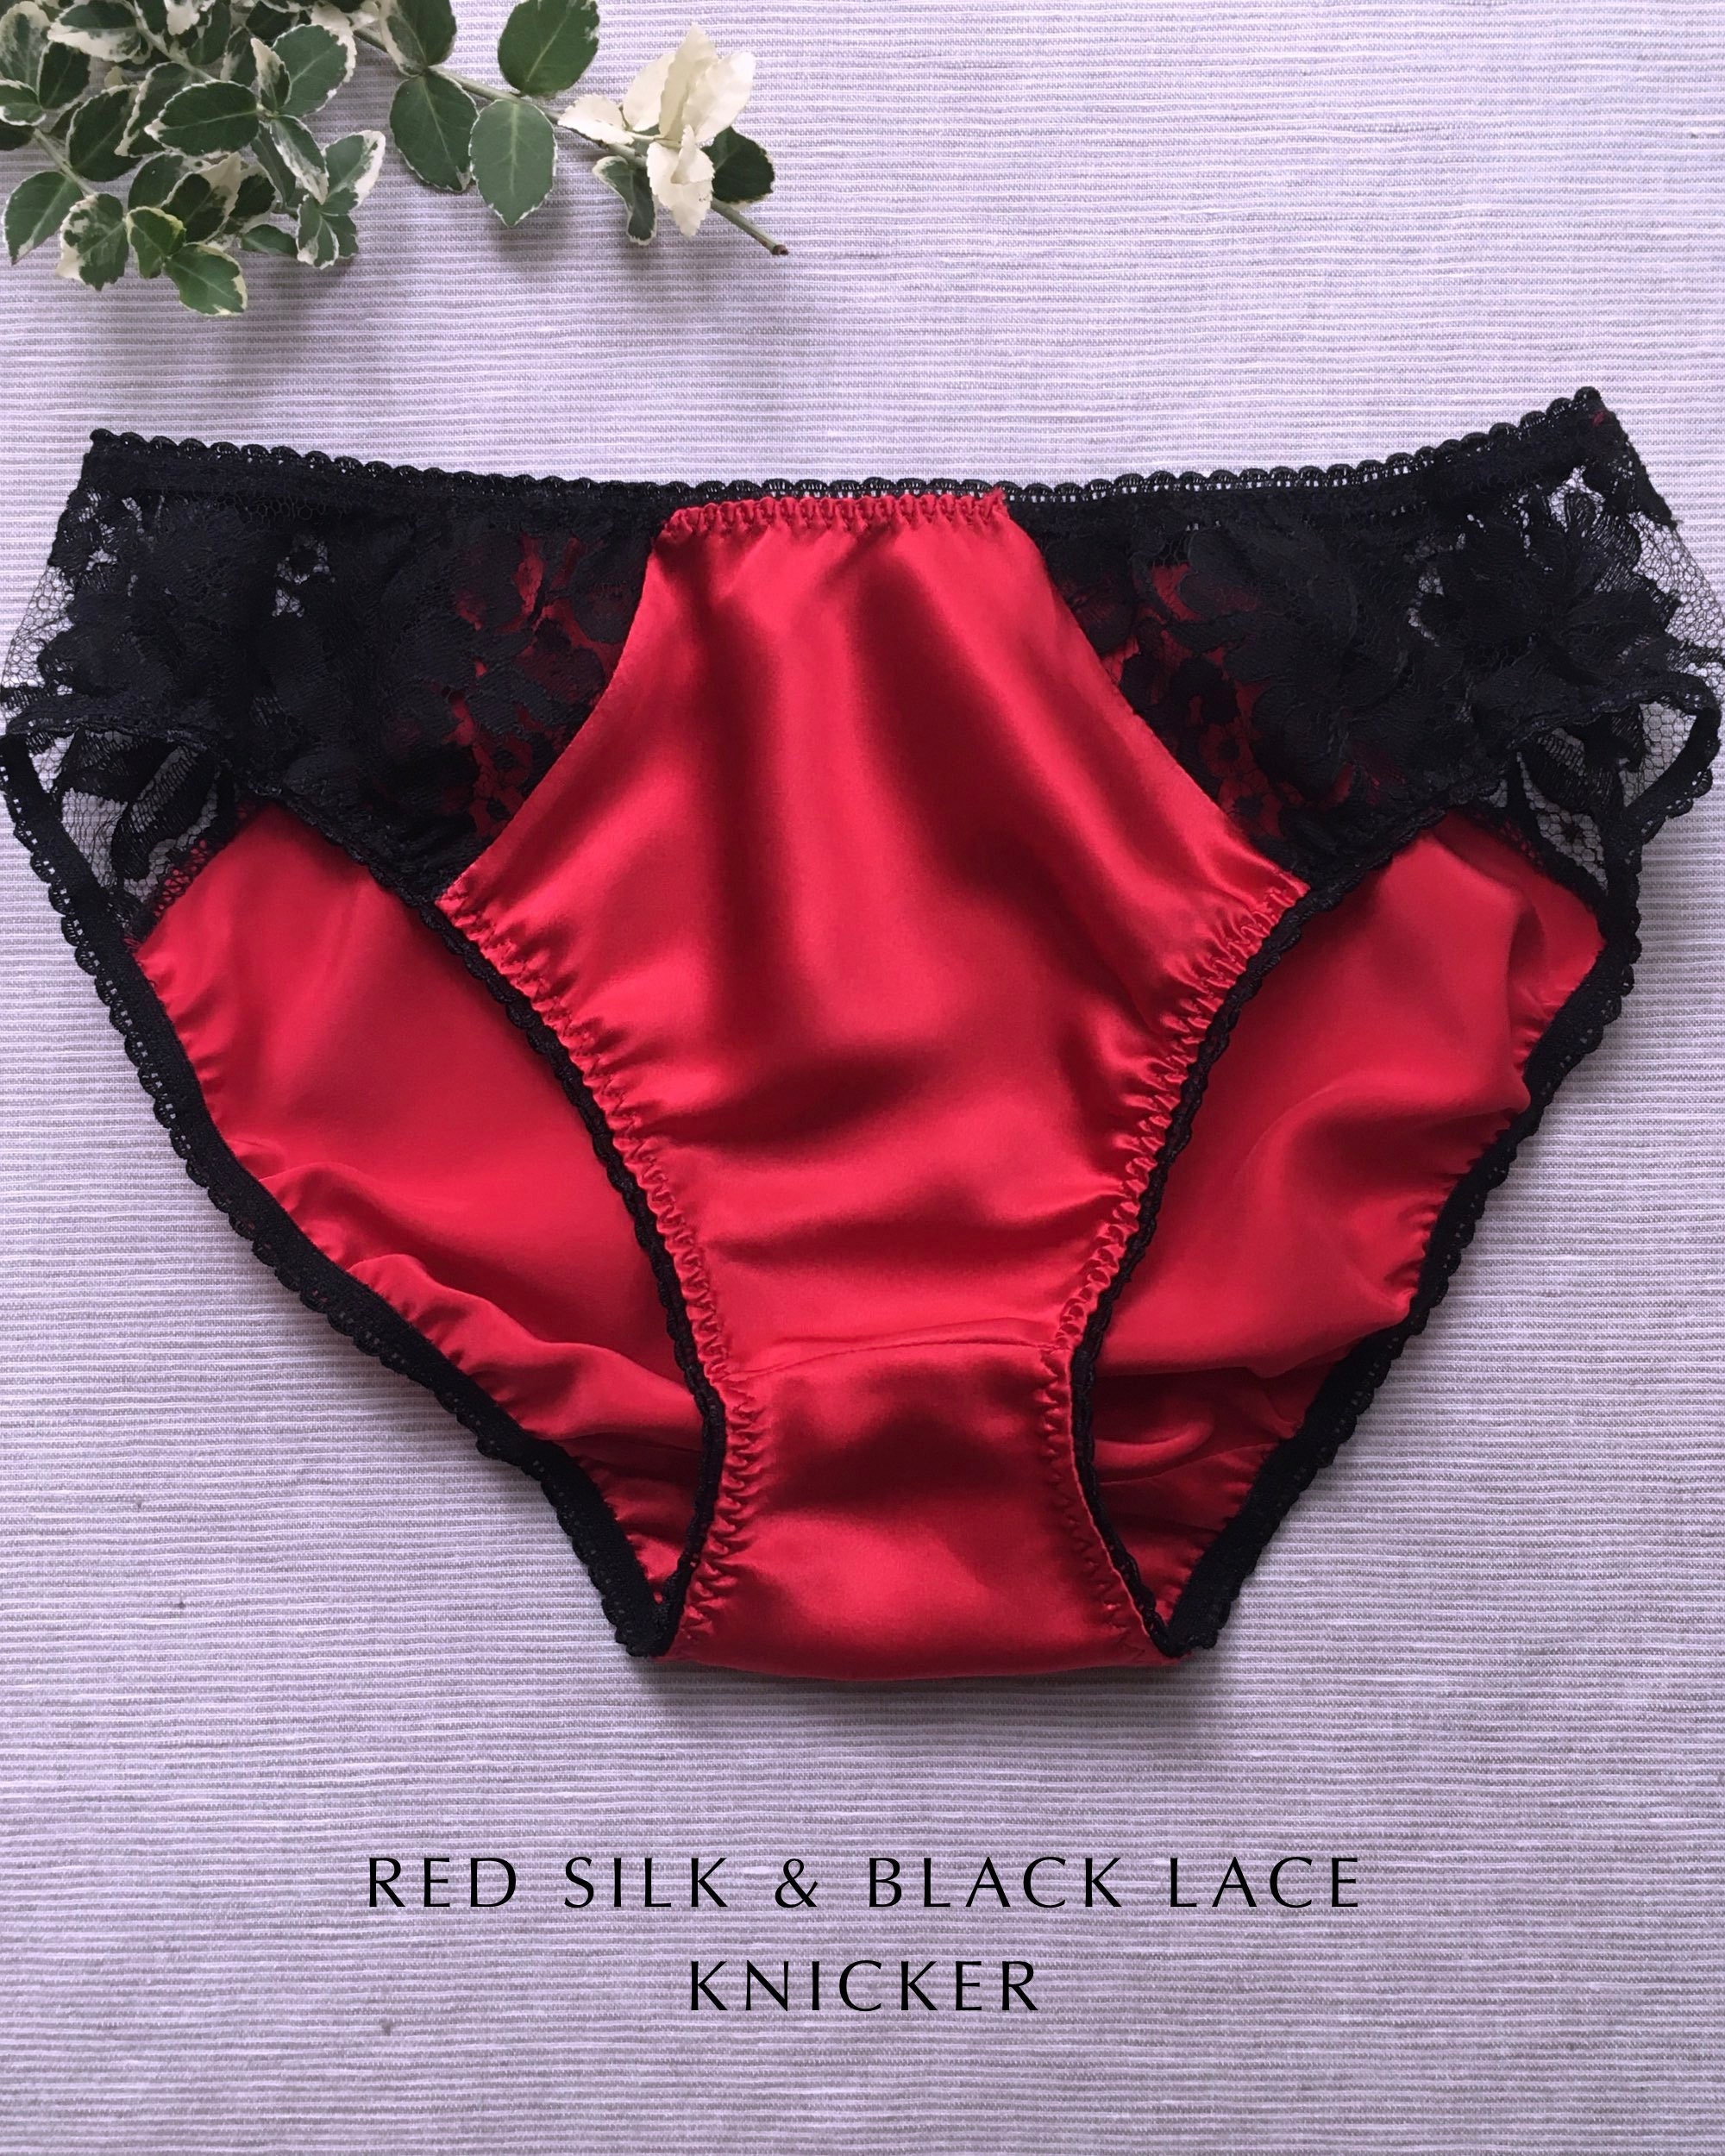 Bright Red Shiny Satin High Cut French Knicker With Black Lace Trim. High  Rise Full Bottom Cover Style Sassy Knickers French Panties -  Canada